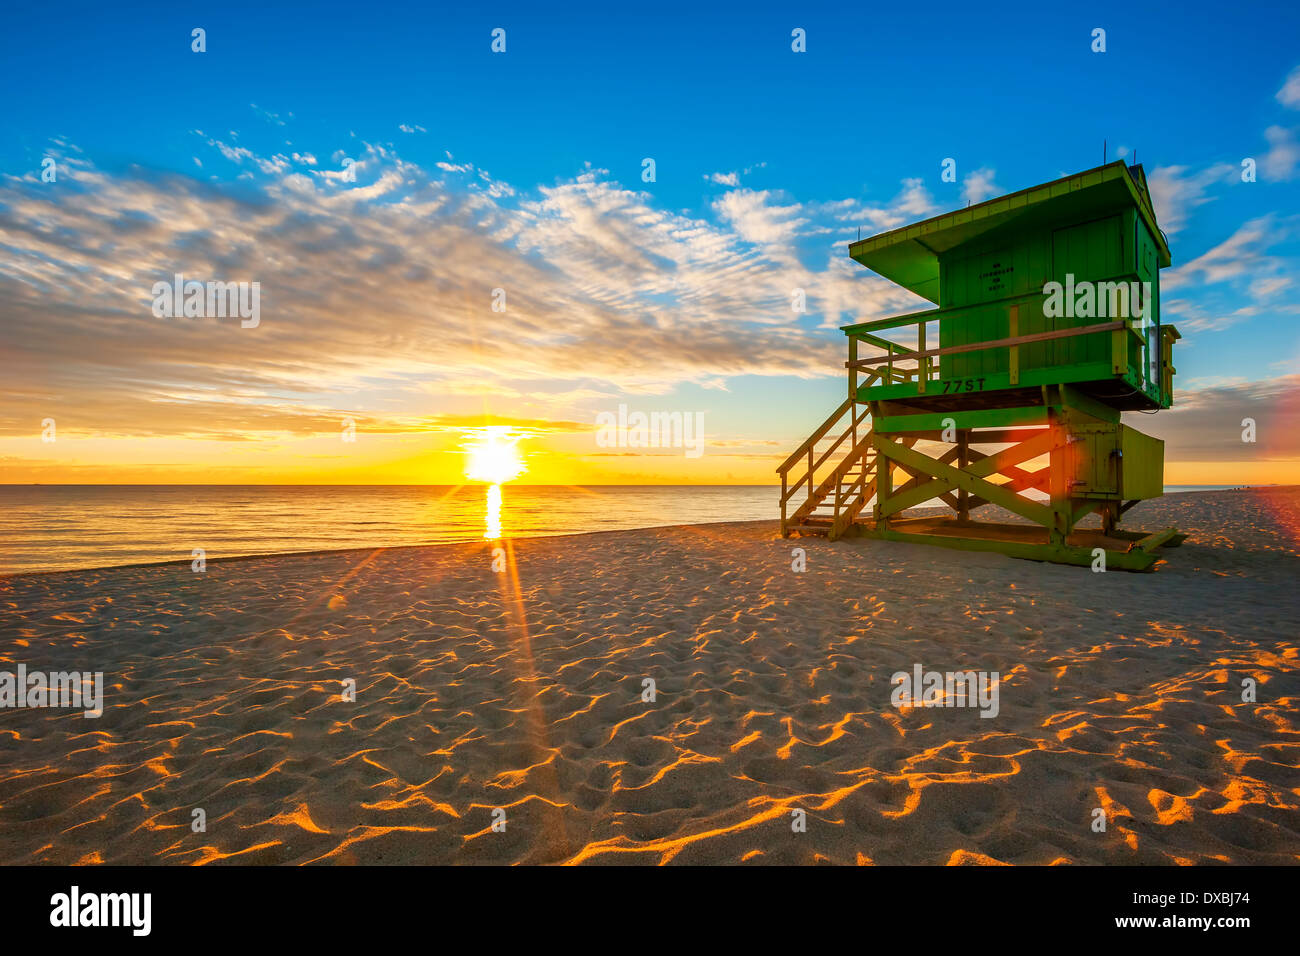 Famous Miami South Beach sunrise with lifeguard tower Stock Photo